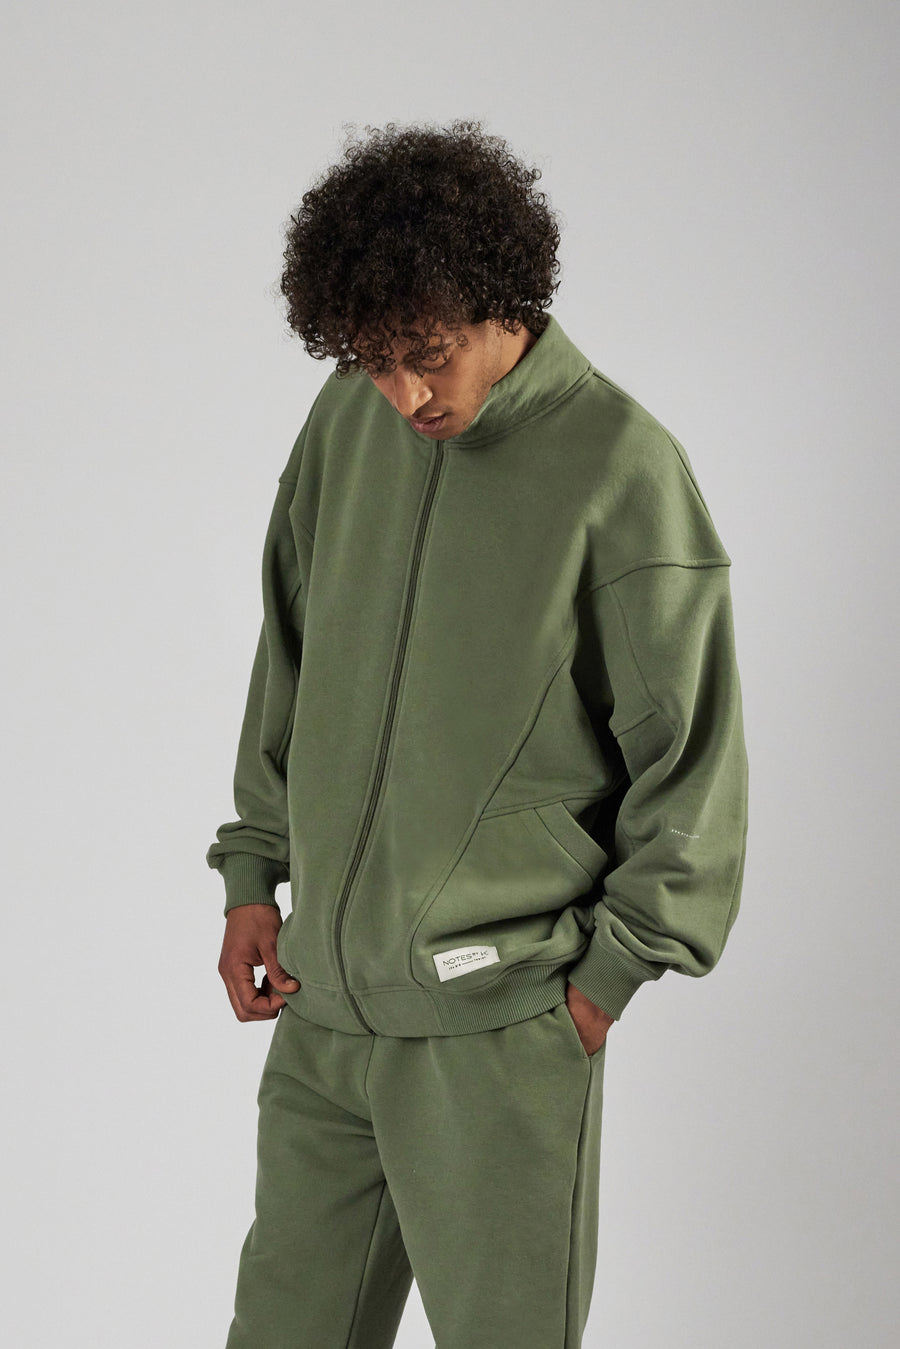 Man wearing an oversized zipper sweat jacket and sweatpants in color sage green